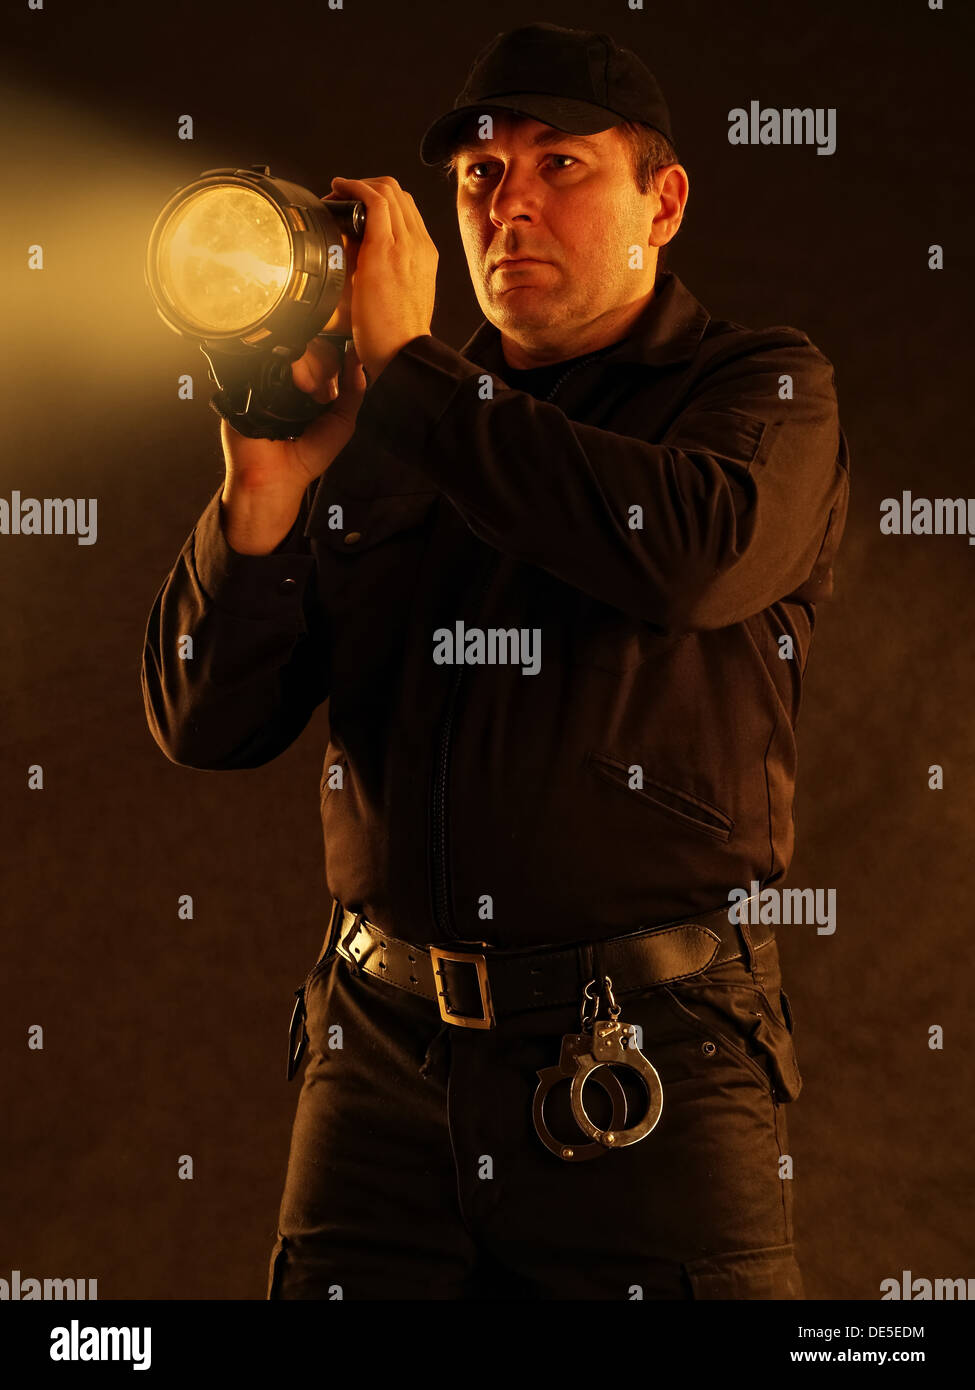 Policeman with lit torch searching the area Stock Photo